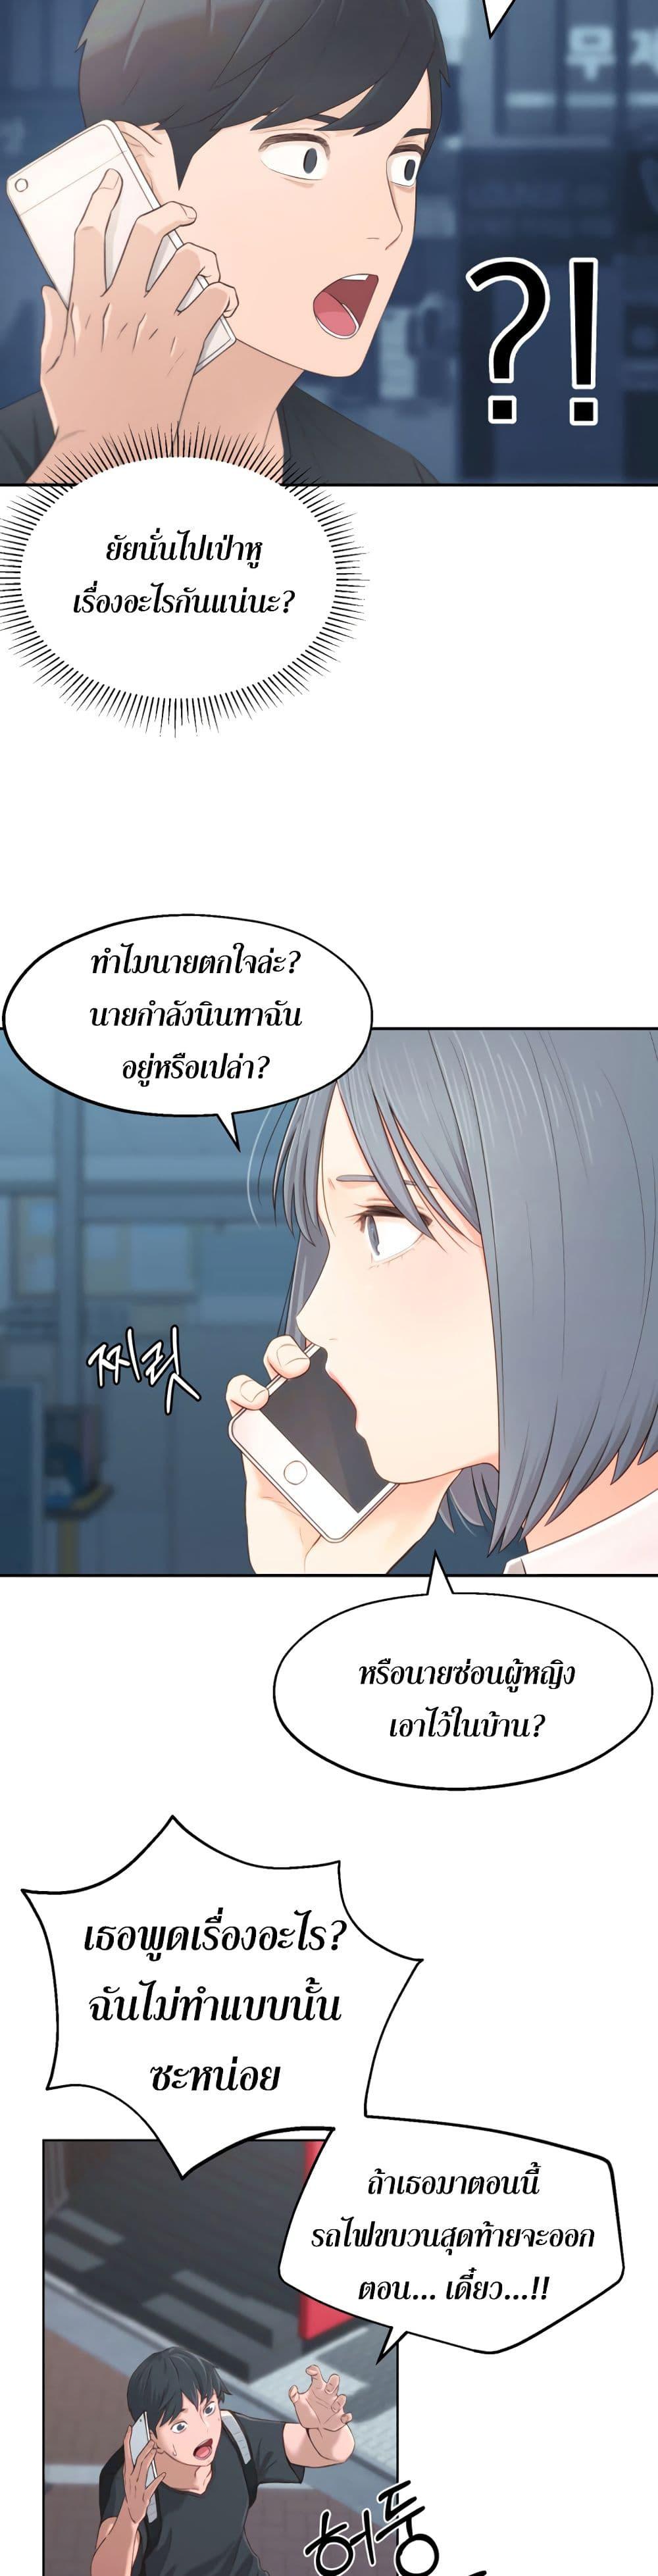 A Knowing Sister 1 ภาพ 38